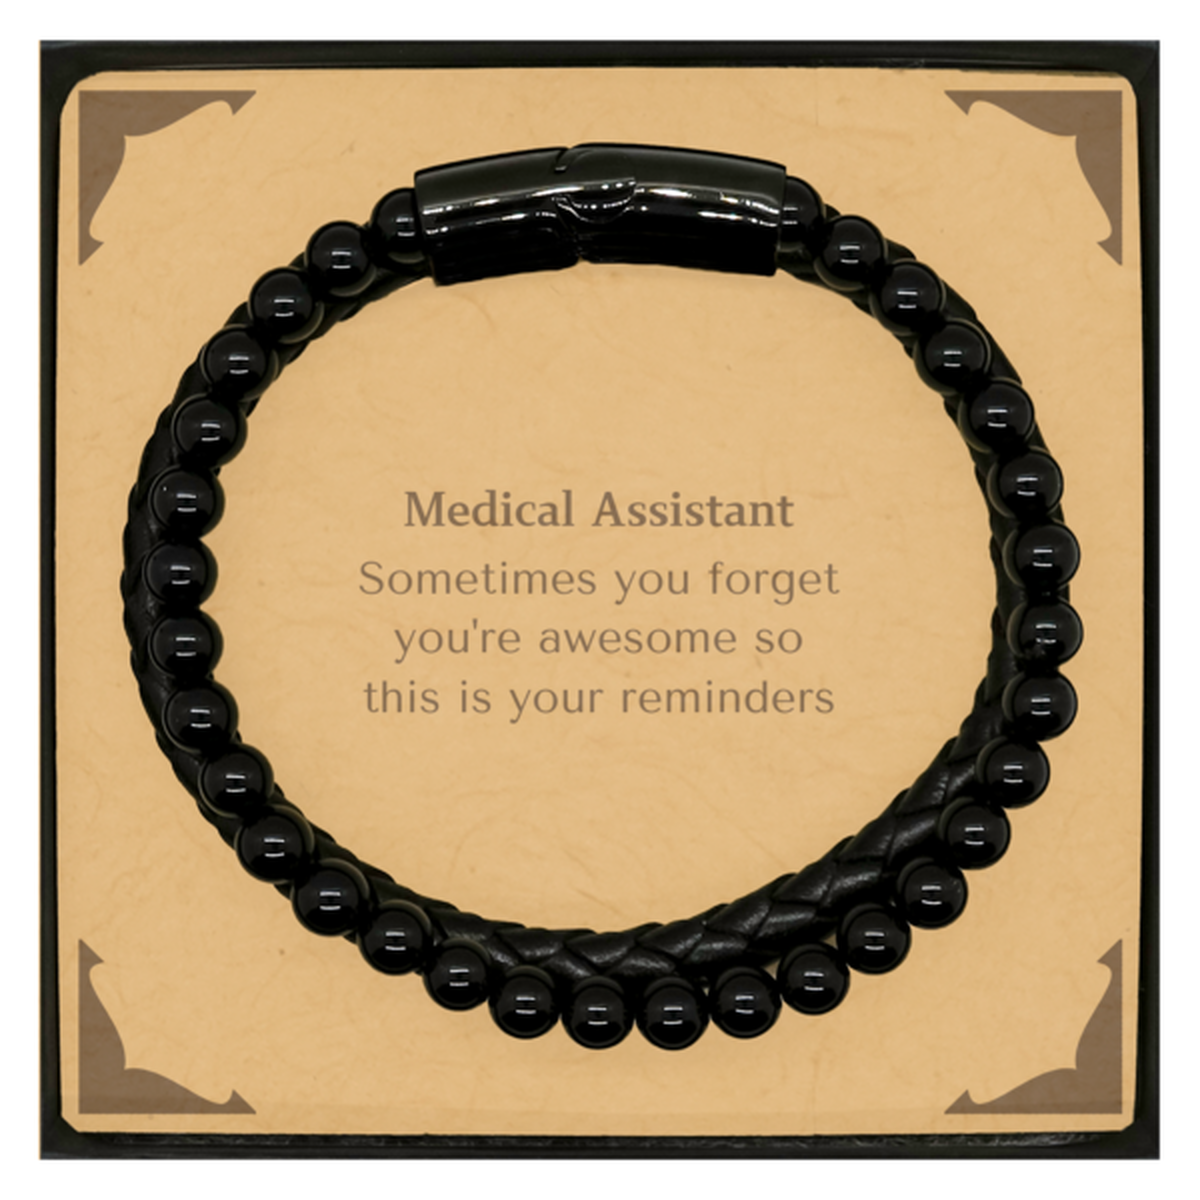 Sentimental Medical Assistant Stone Leather Bracelets, Medical Assistant Sometimes you forget you're awesome so this is your reminders, Graduation Christmas Birthday Gifts for Medical Assistant, Men, Women, Coworkers